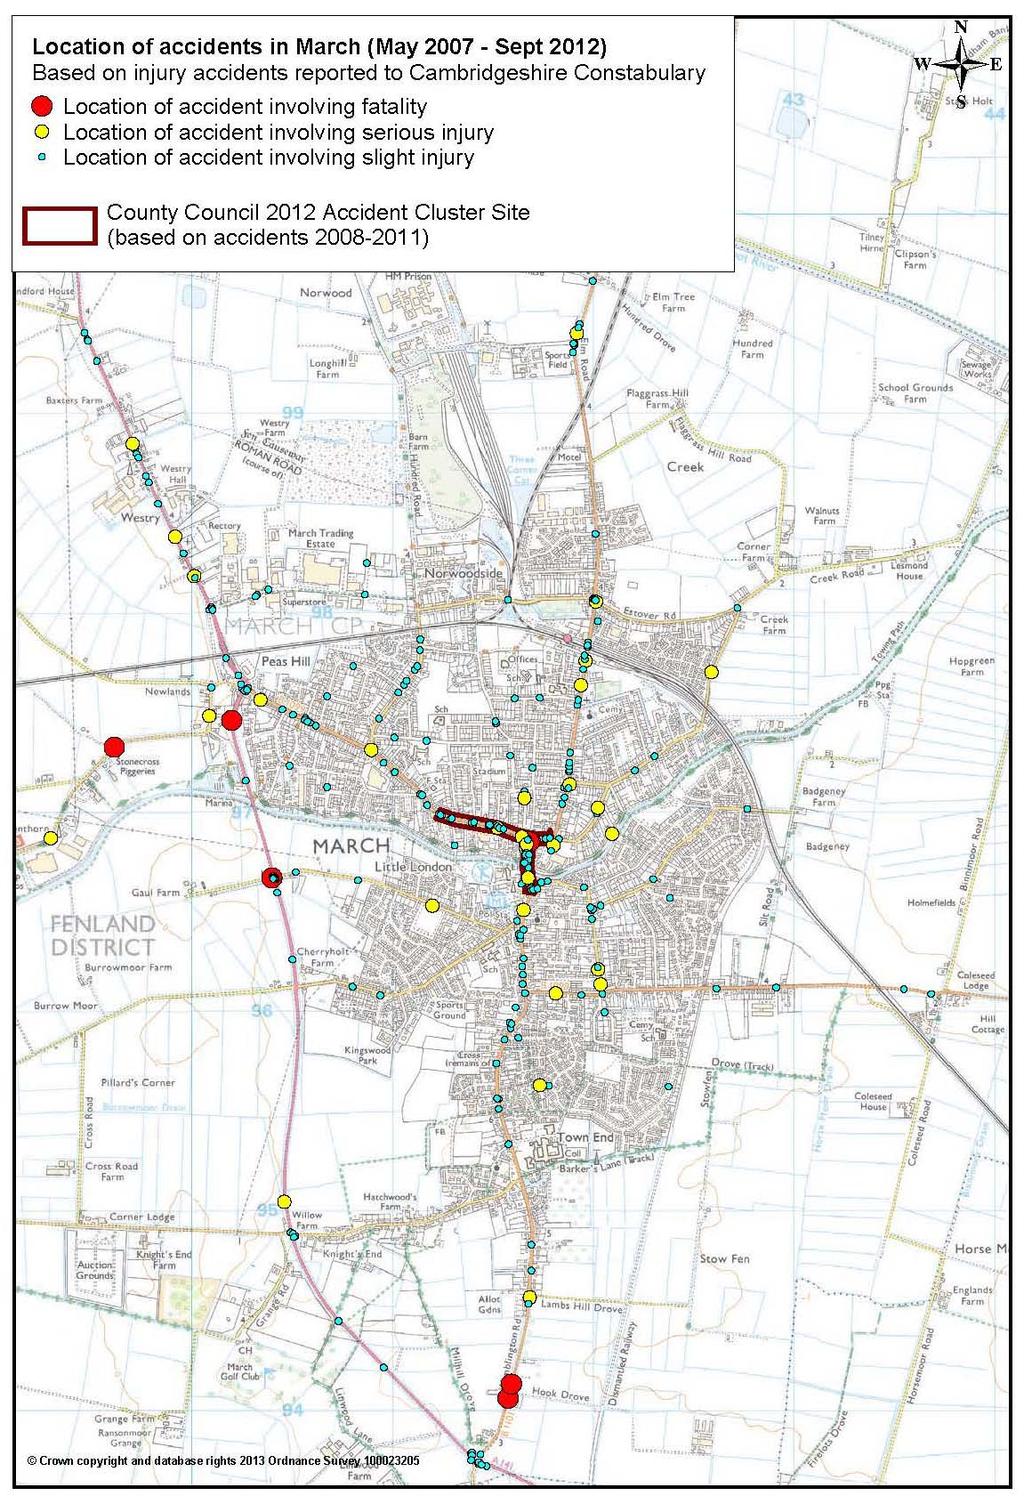 FIGURE 2: MAP SHOWING THE LOCATION OF REPORTED TRAFFIC ACCIDENTS INVOLVING